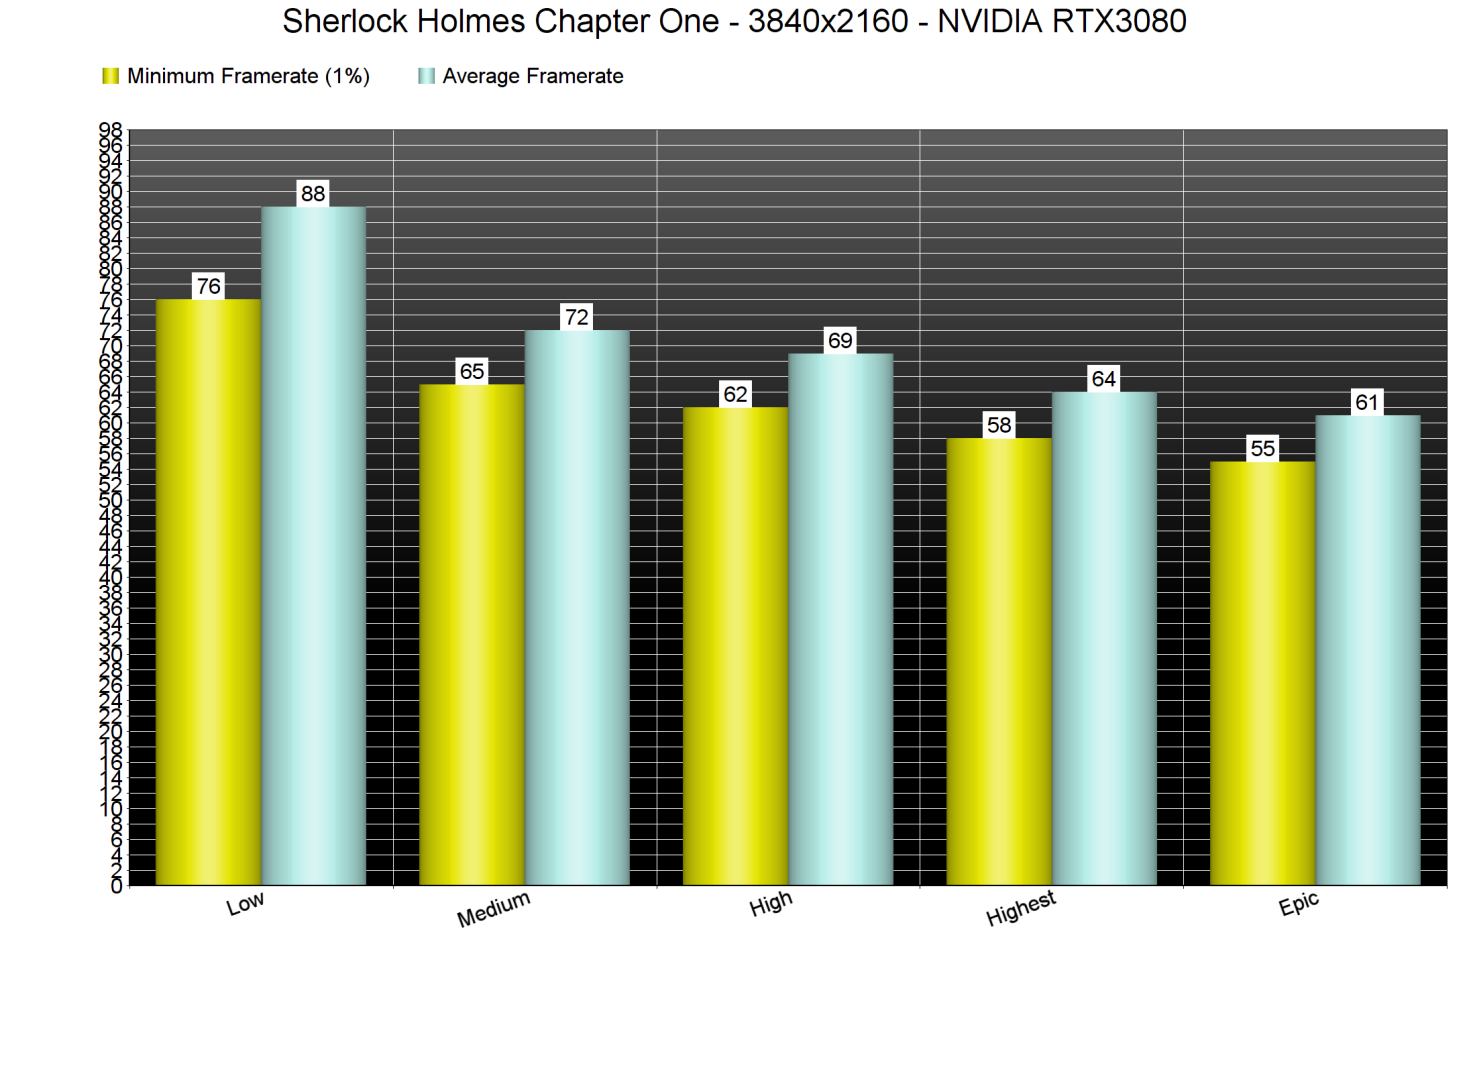 Sherlock Holmes Chapter One graphics benchmarks